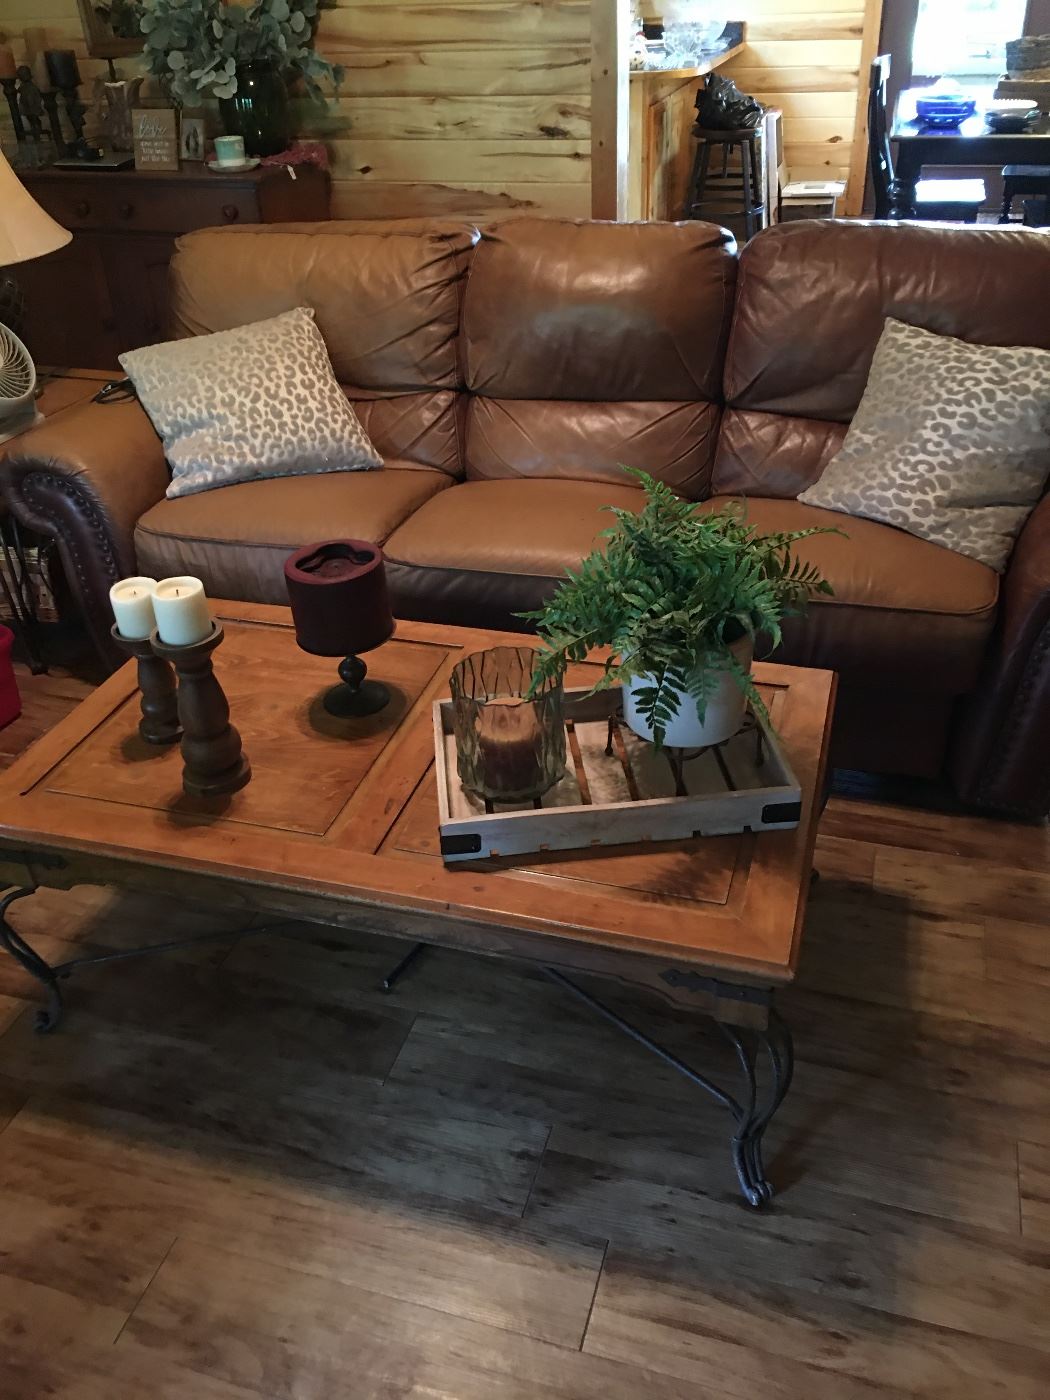 Sofa, coffee table, candles